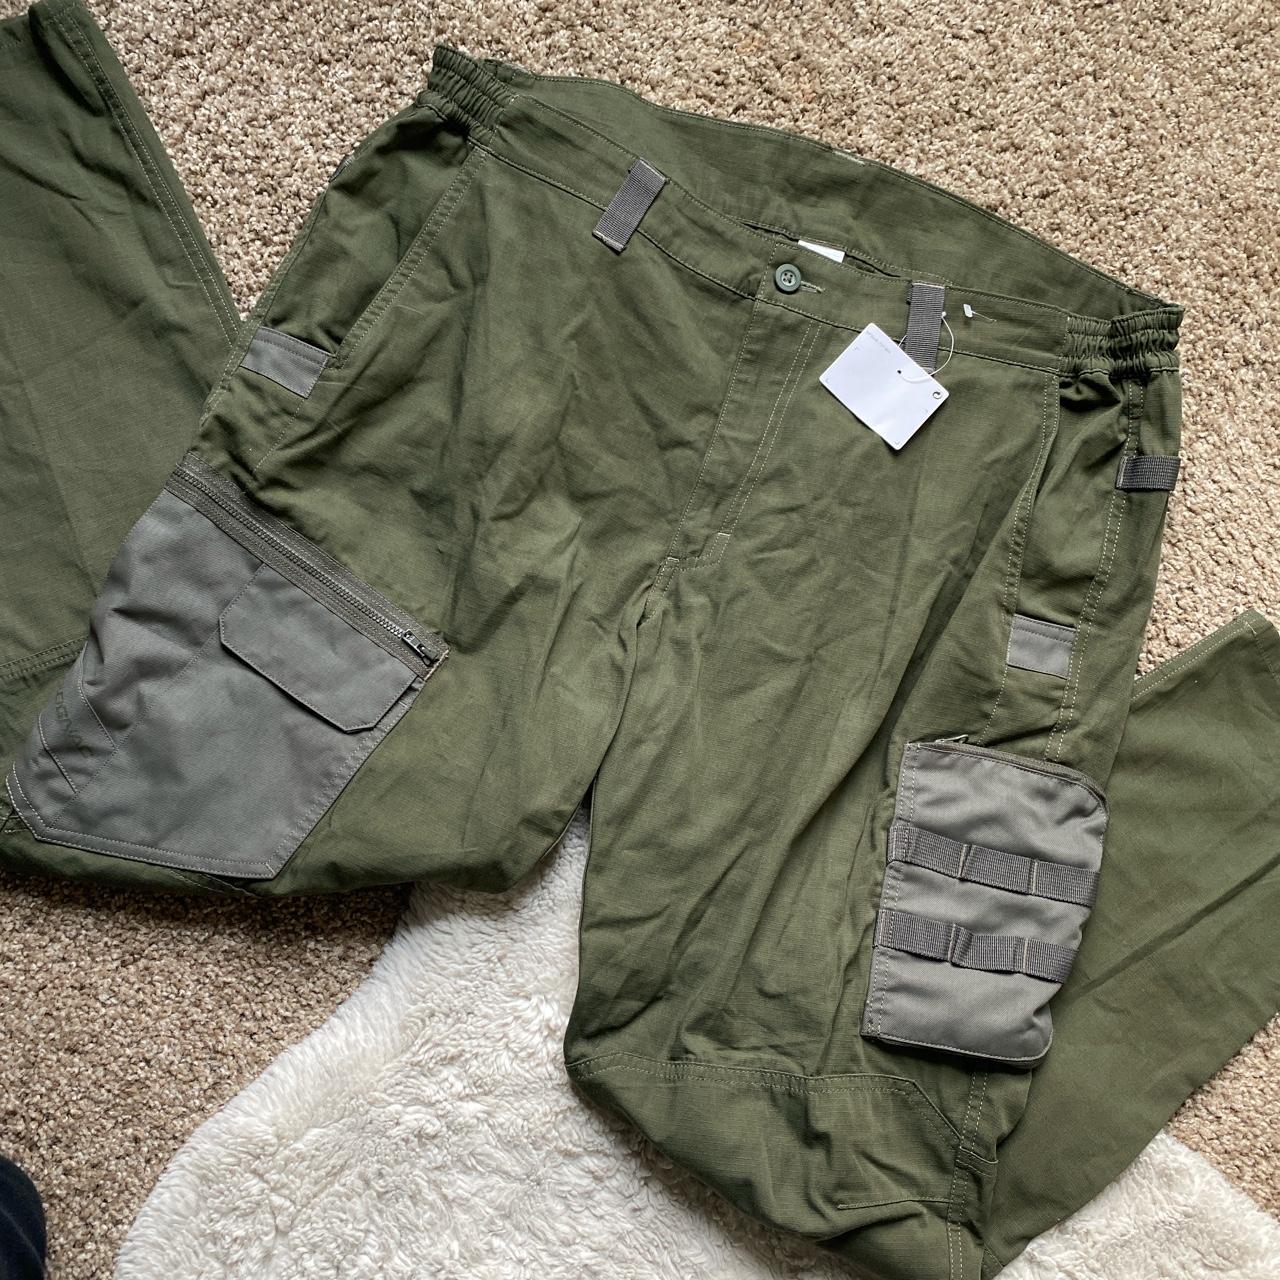 Product Image 1 - Army green Cargo Pants❤️‍🔥

These are